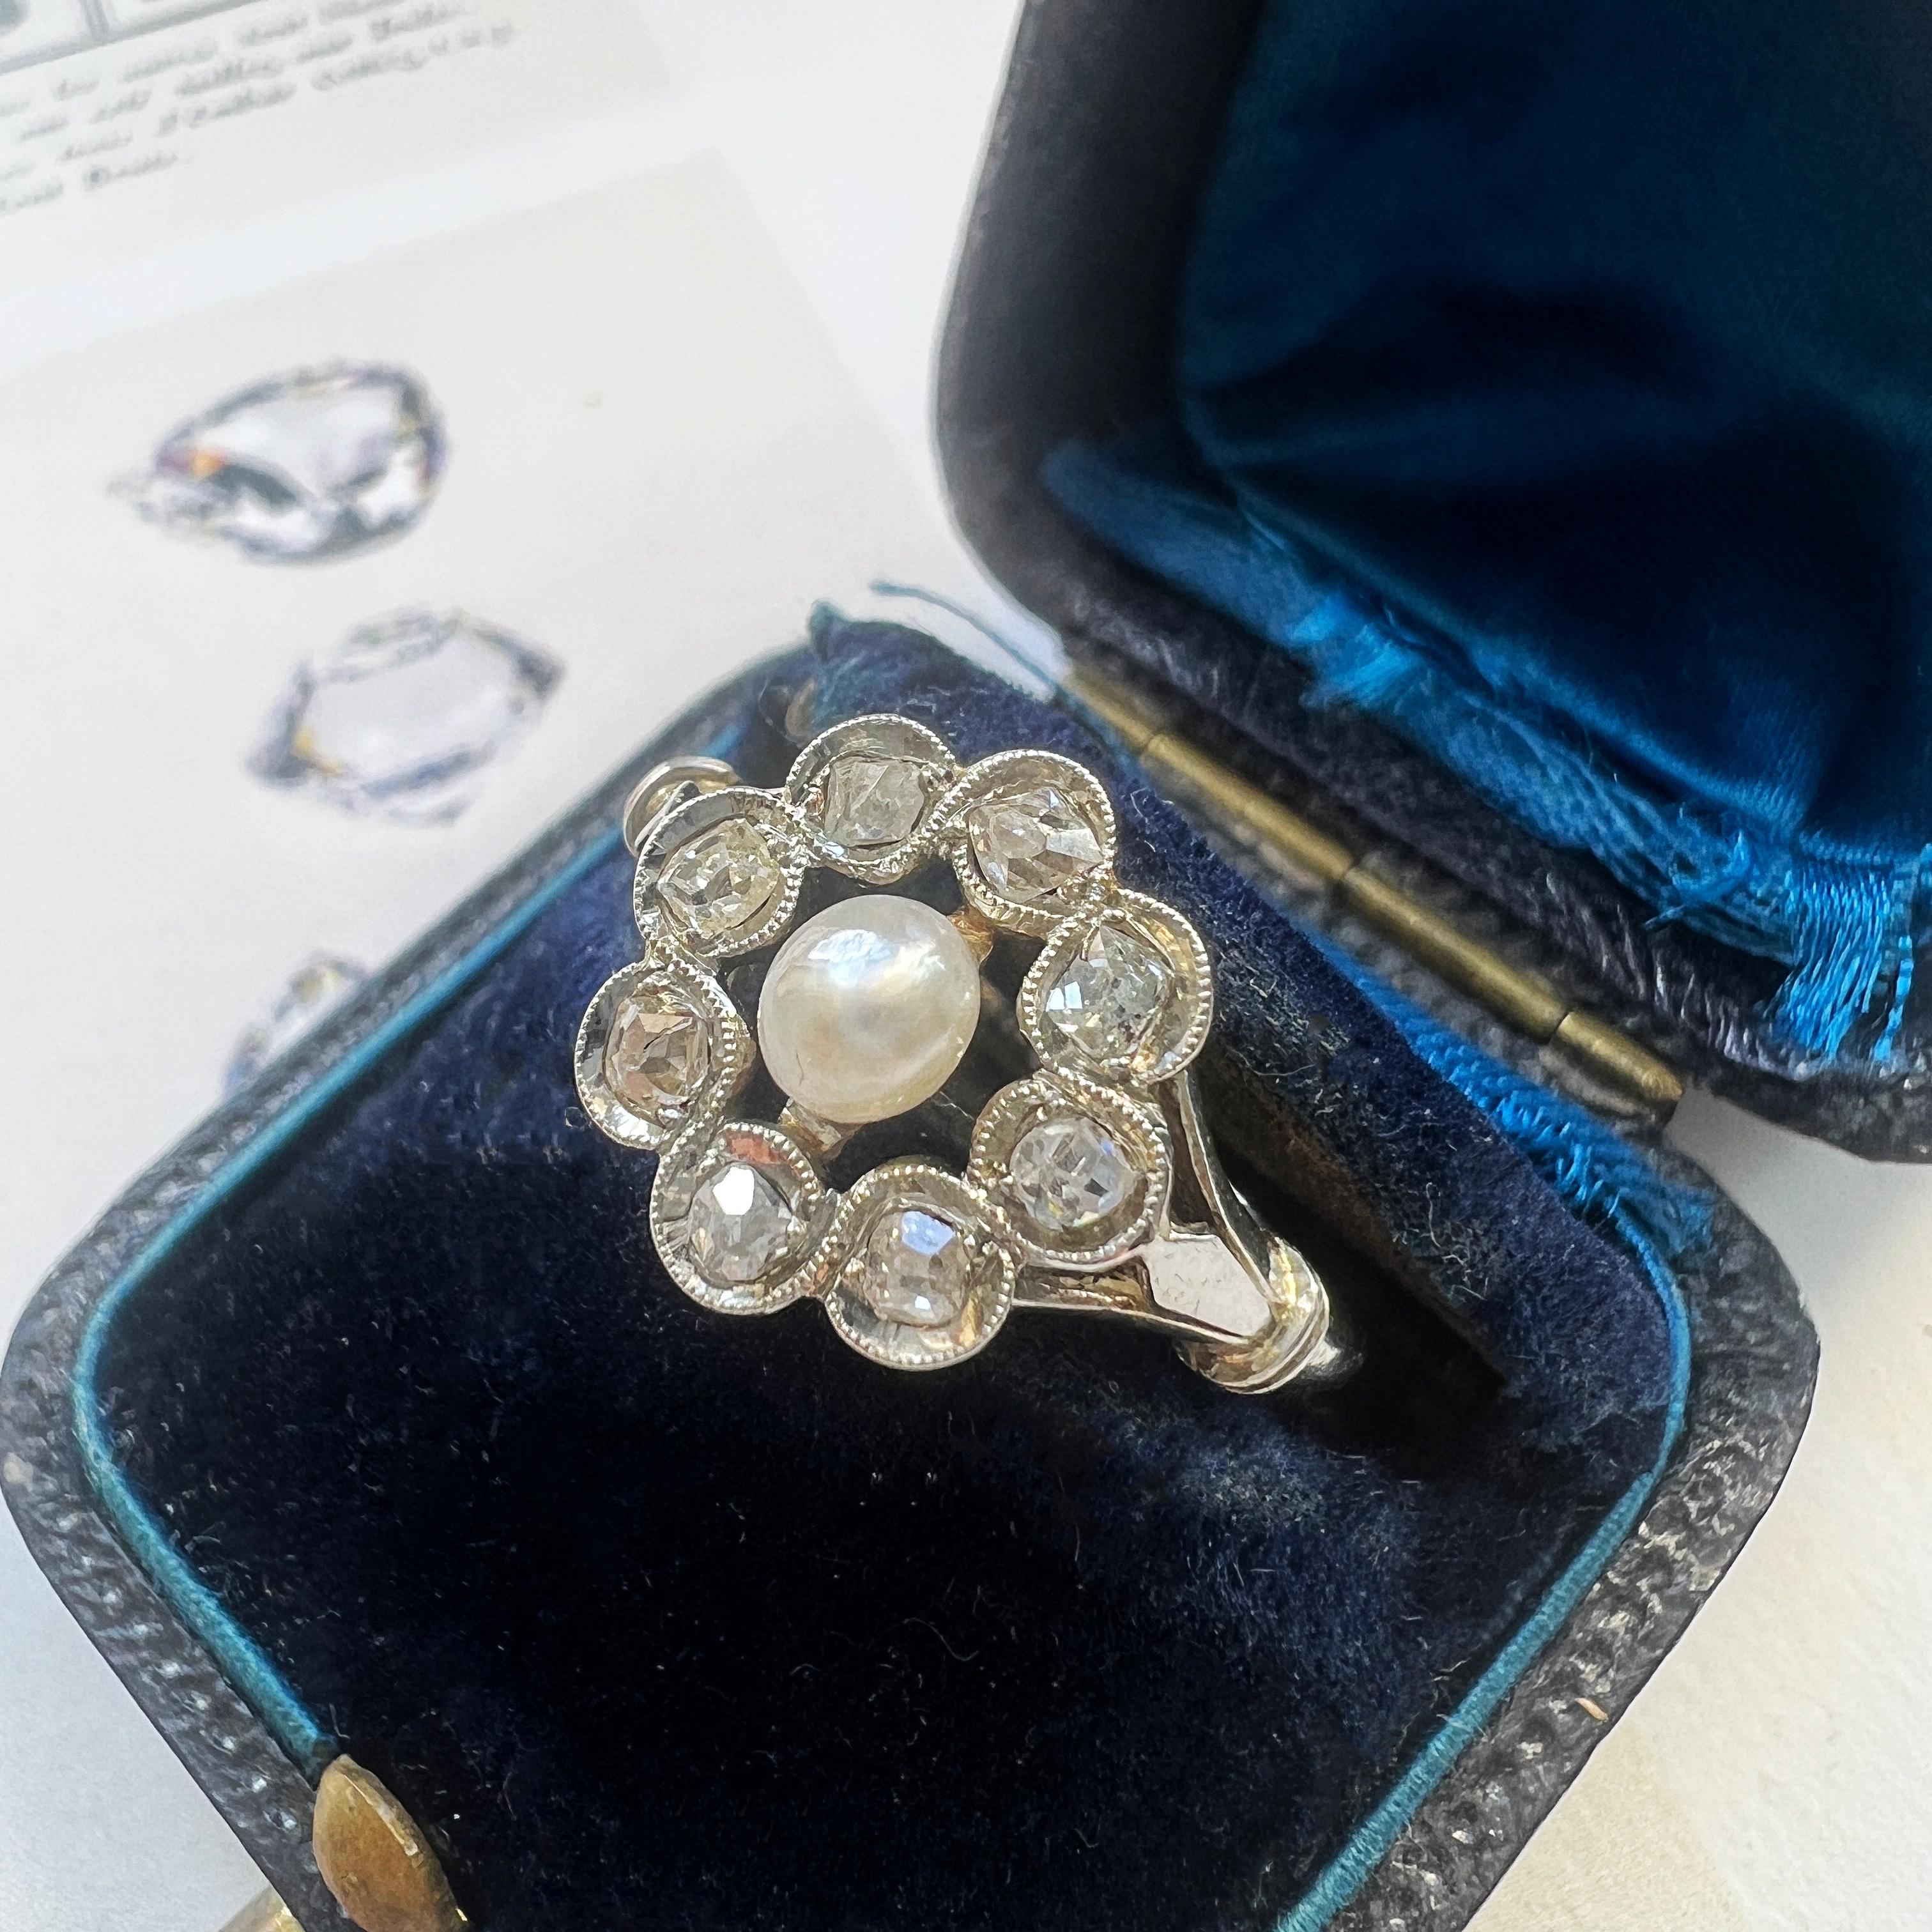 For sale a lovely French work, 18K white gold cluster ring, featuring a white color, natural pearl in the center. The pearl has a semi-rounded shape which makes it different from the standardized human cultured pearls we have today. It shows a very